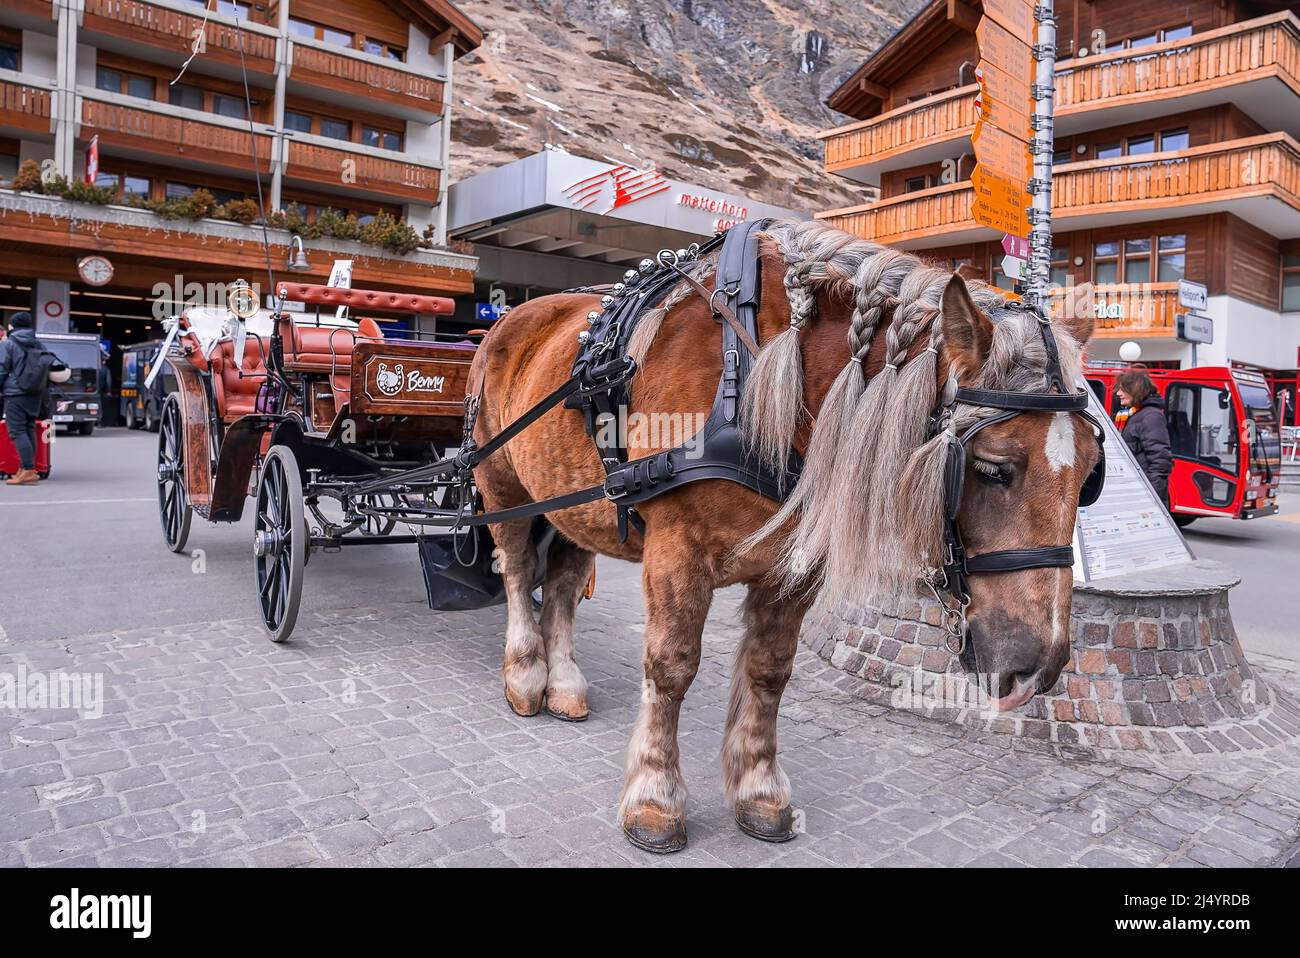 Horse with braided mane carrying cart on street of town square against houses Stock Photo